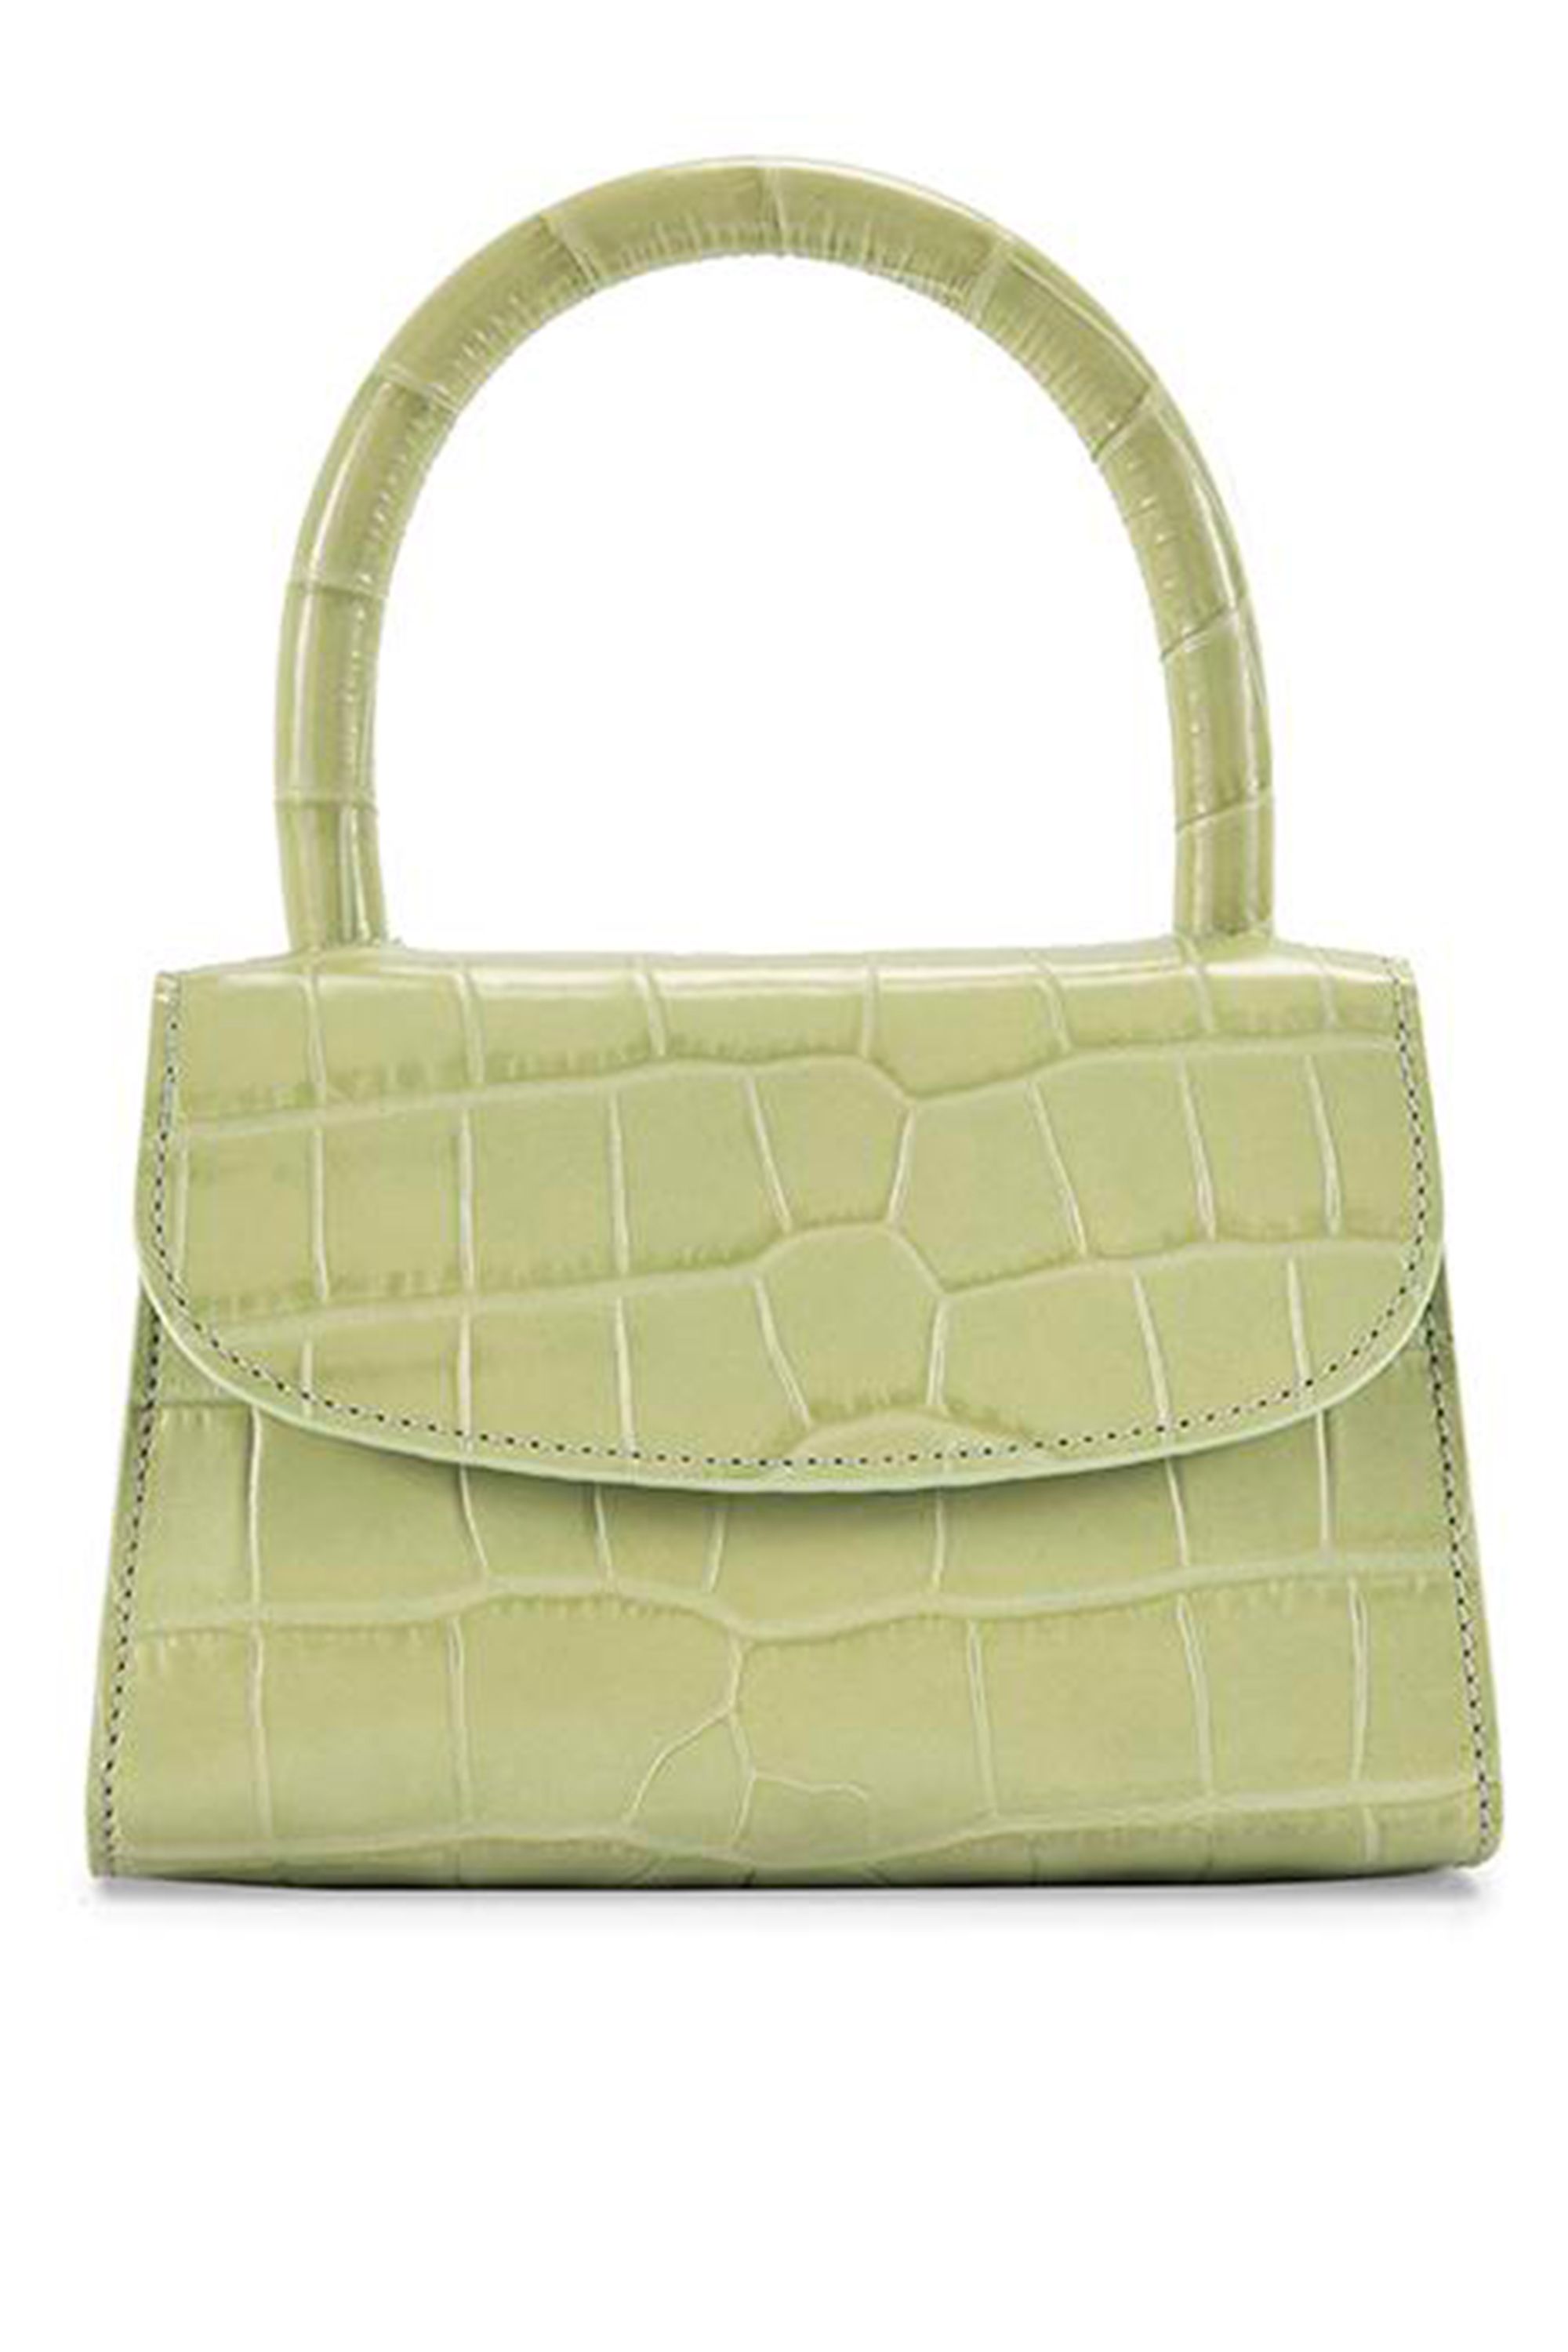 Pistachio Is the Latest Green Hue You Need: 11 Items to Get the Look